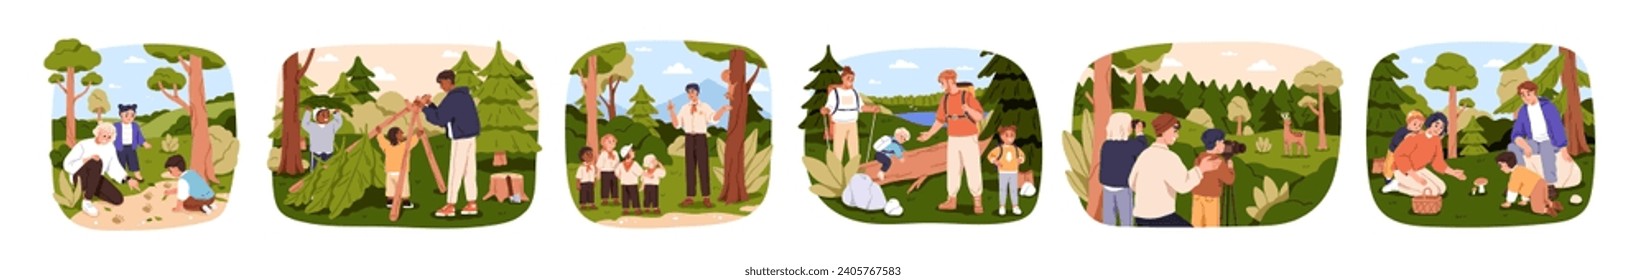 Children and adults in forest set. Kids, parents in nature on summer holiday, studying environment. Outdoor leisure, scouting, adventure. Flat graphic vector illustration isolated on white background